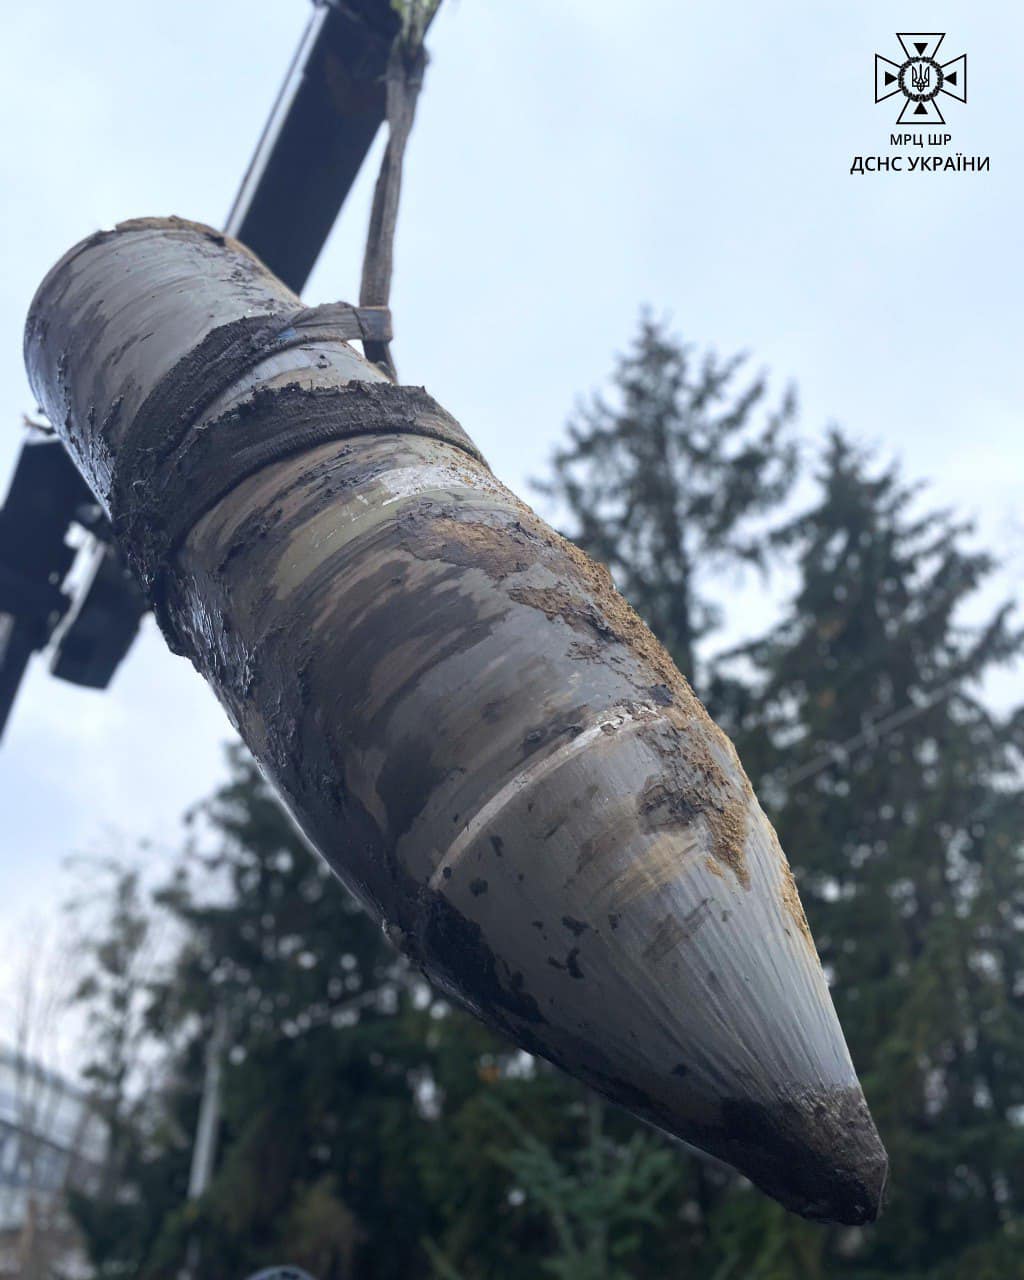 Disposal of a Kh-47M2 Kinzhal warhead after the missile was downed by Ukrainian air defense, January 2024